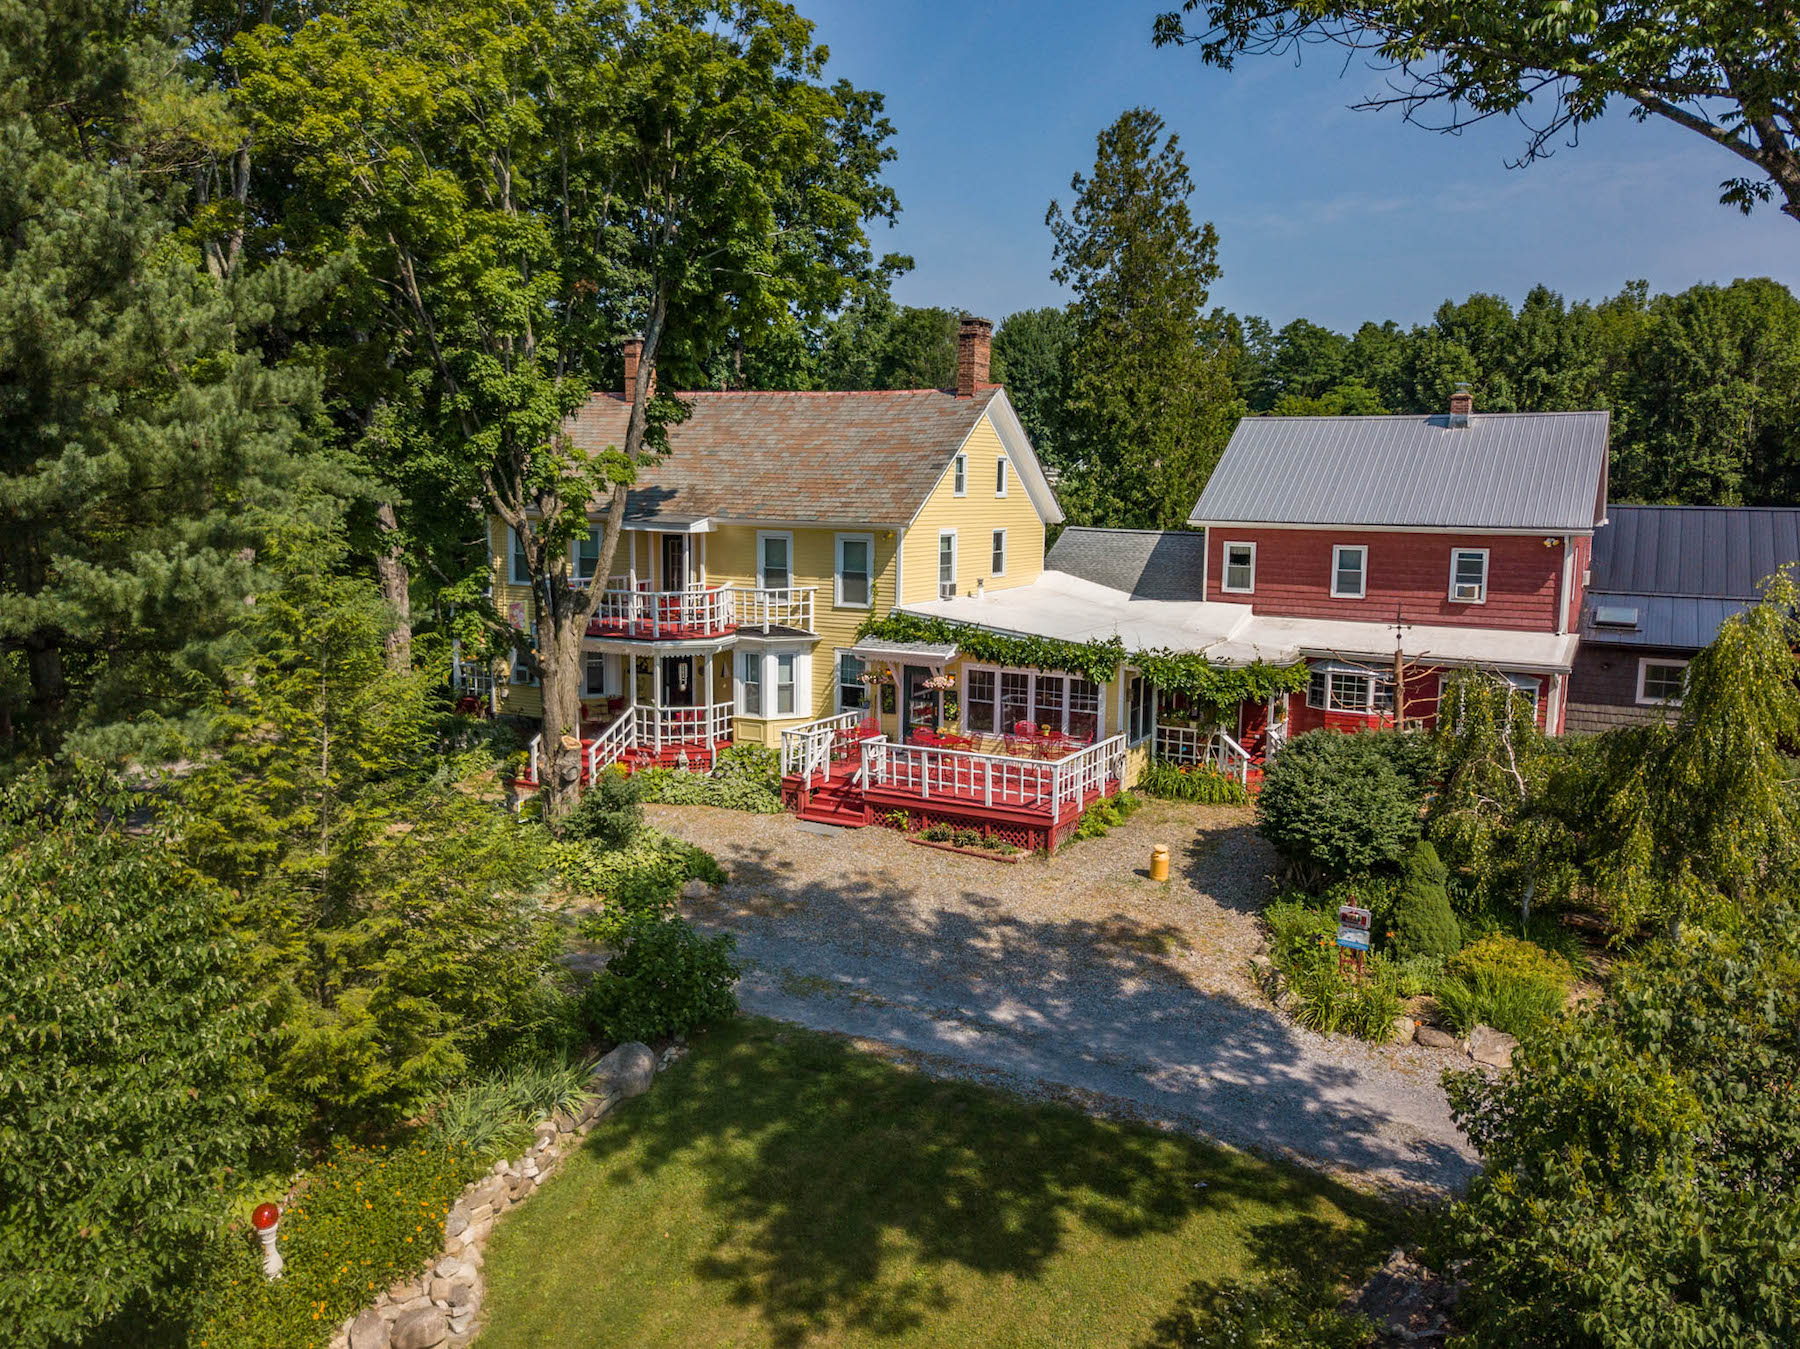 Exterior shot of yellow and red Saratoga Farmstead Bed & Breakfast with luscious greenery